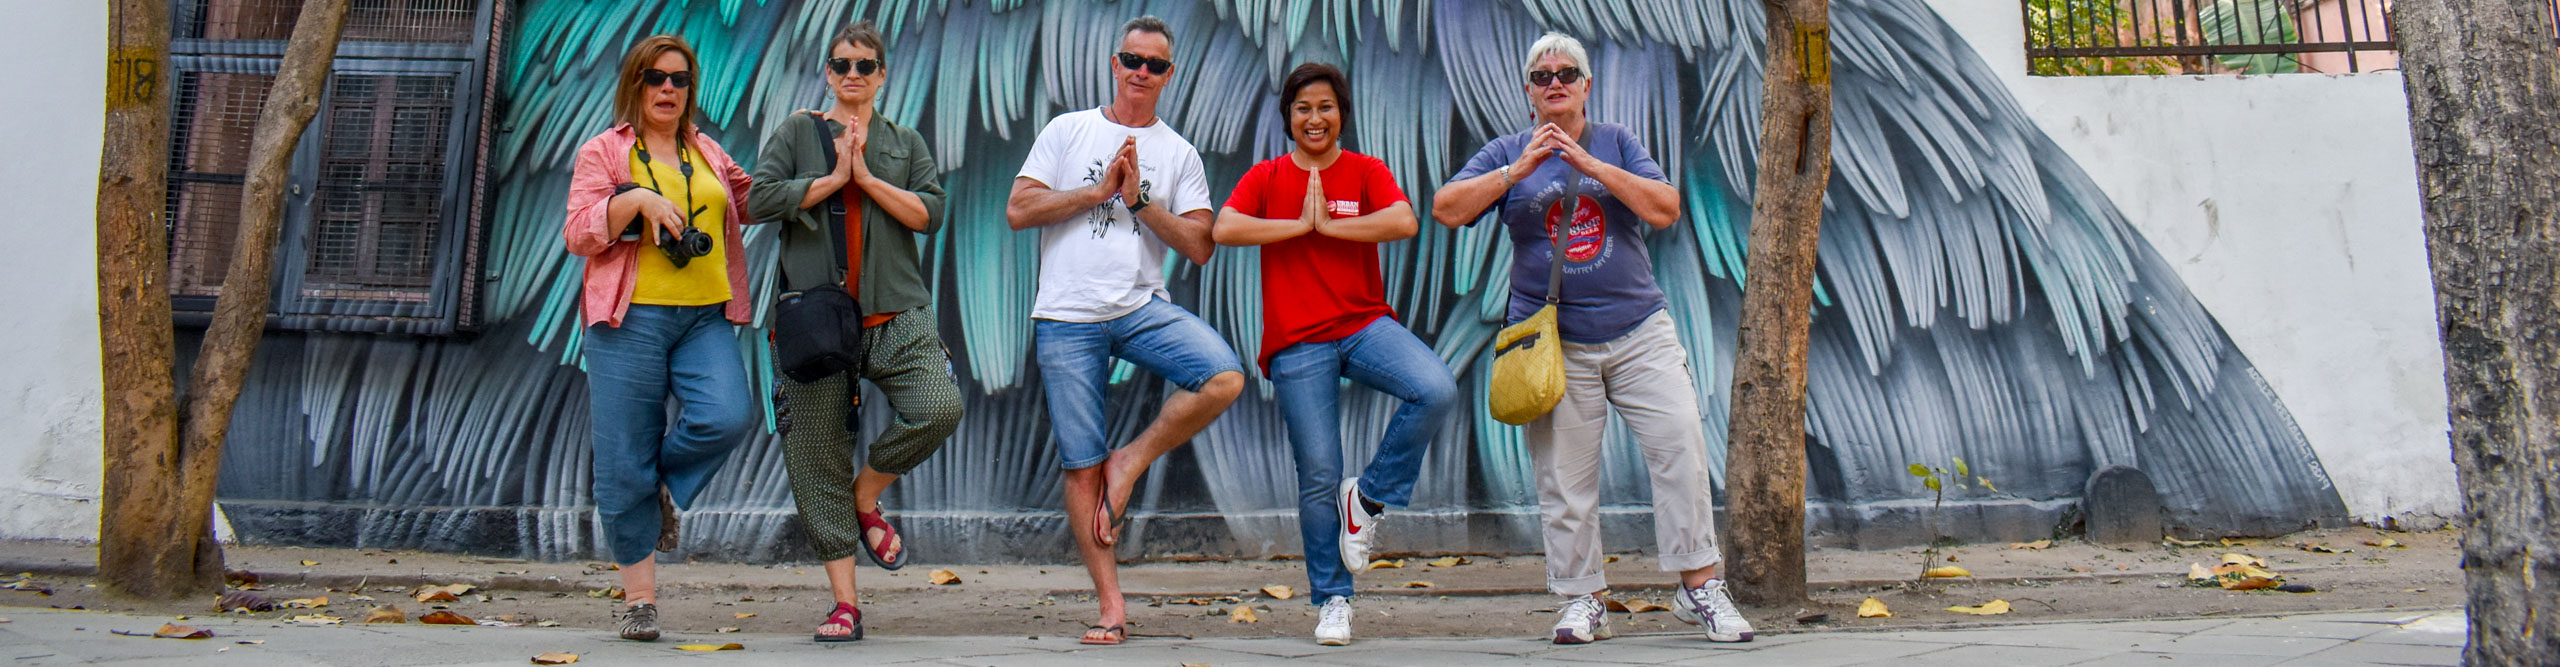 Group doing yoga pose and smiling in front on a mural in the Lodhi Art district in Delhi, India 